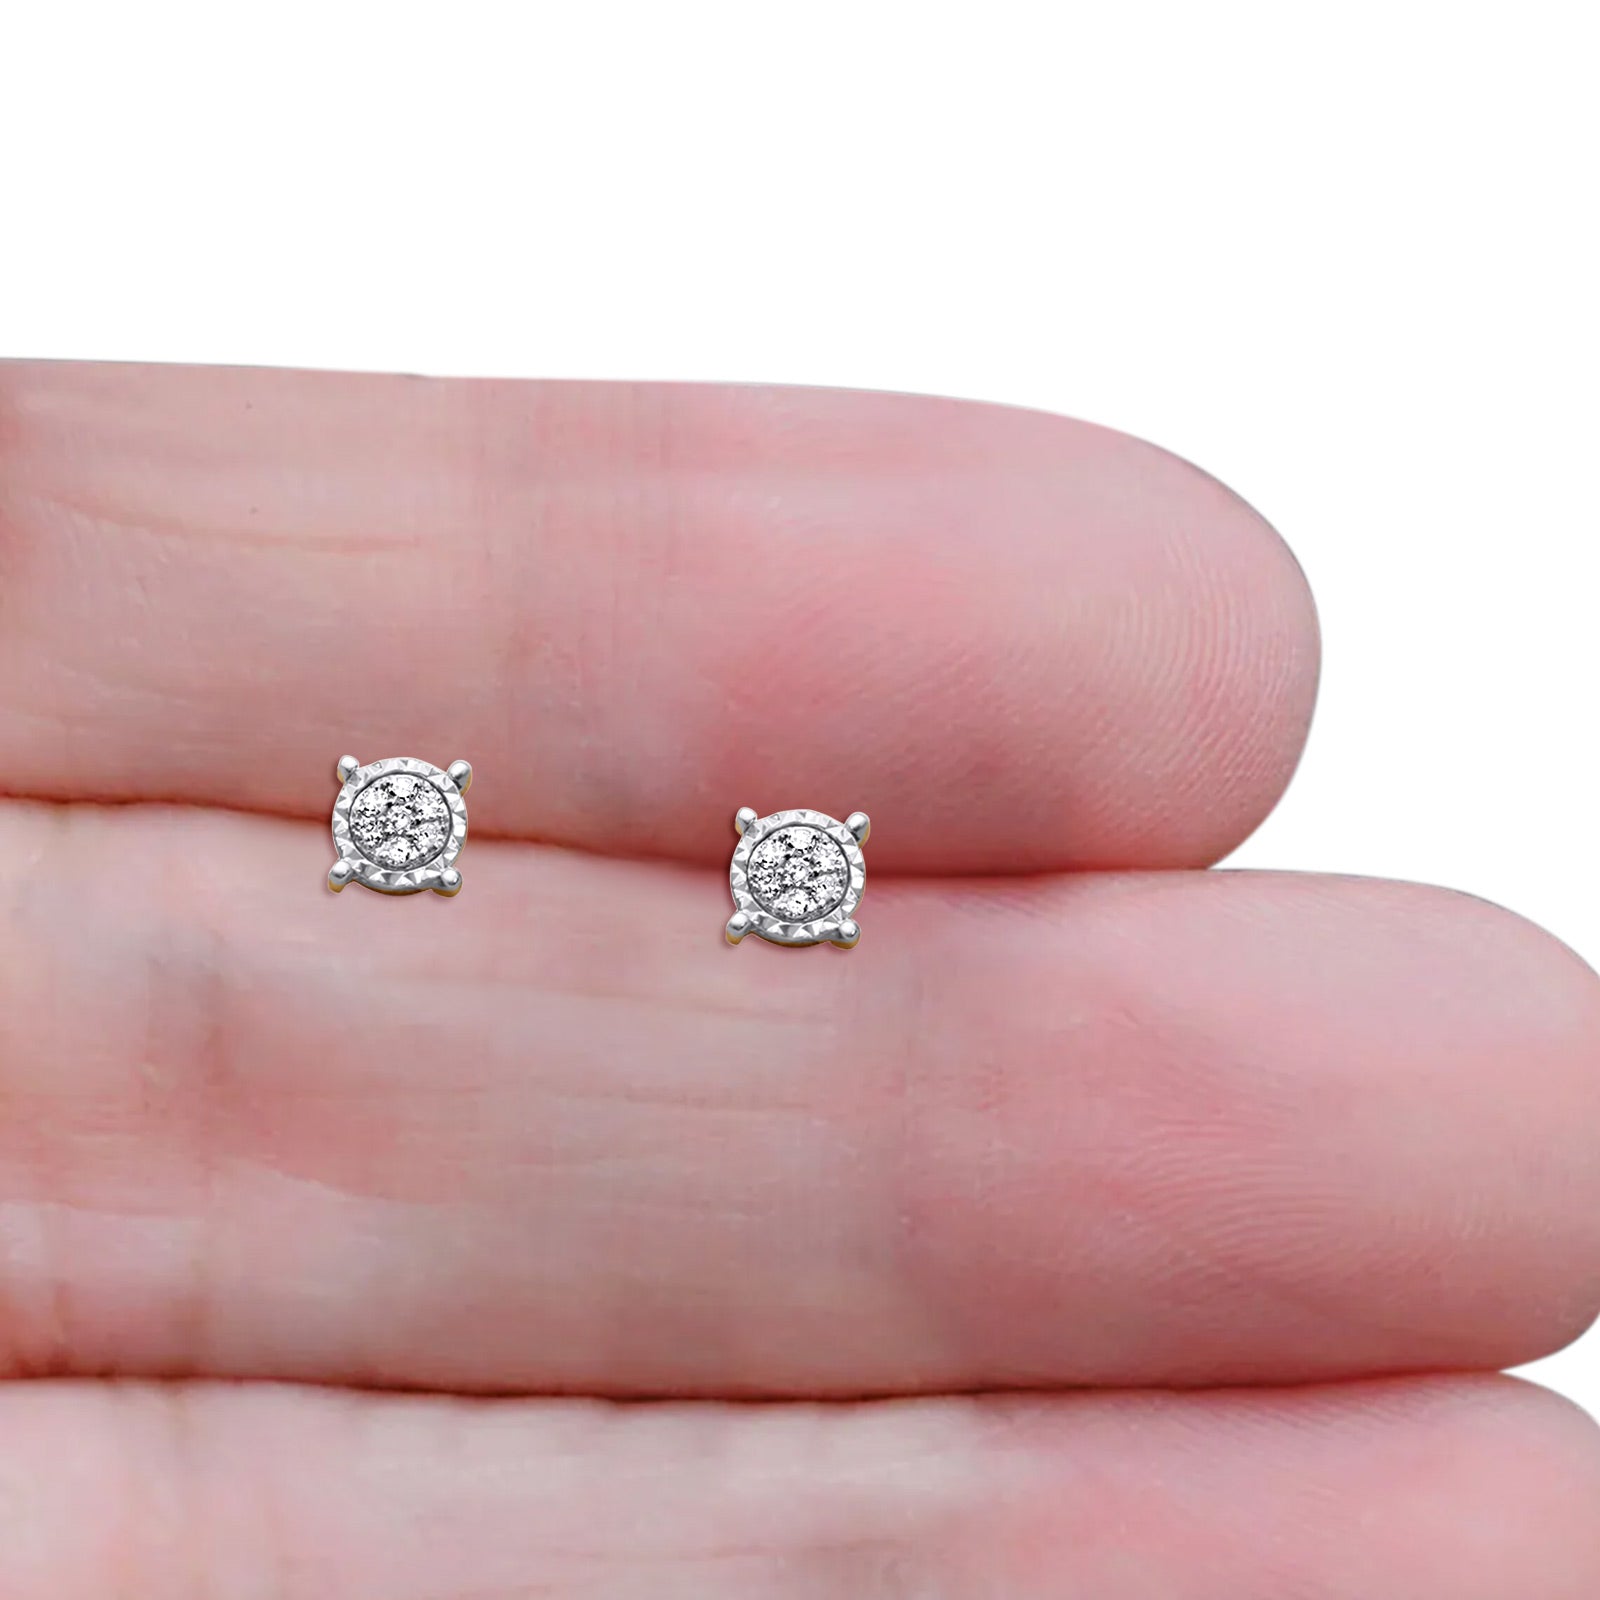 Solid 10K Gold 5.7mm Round Cluster Two Tone Pave Setting Diamond Stud Earring